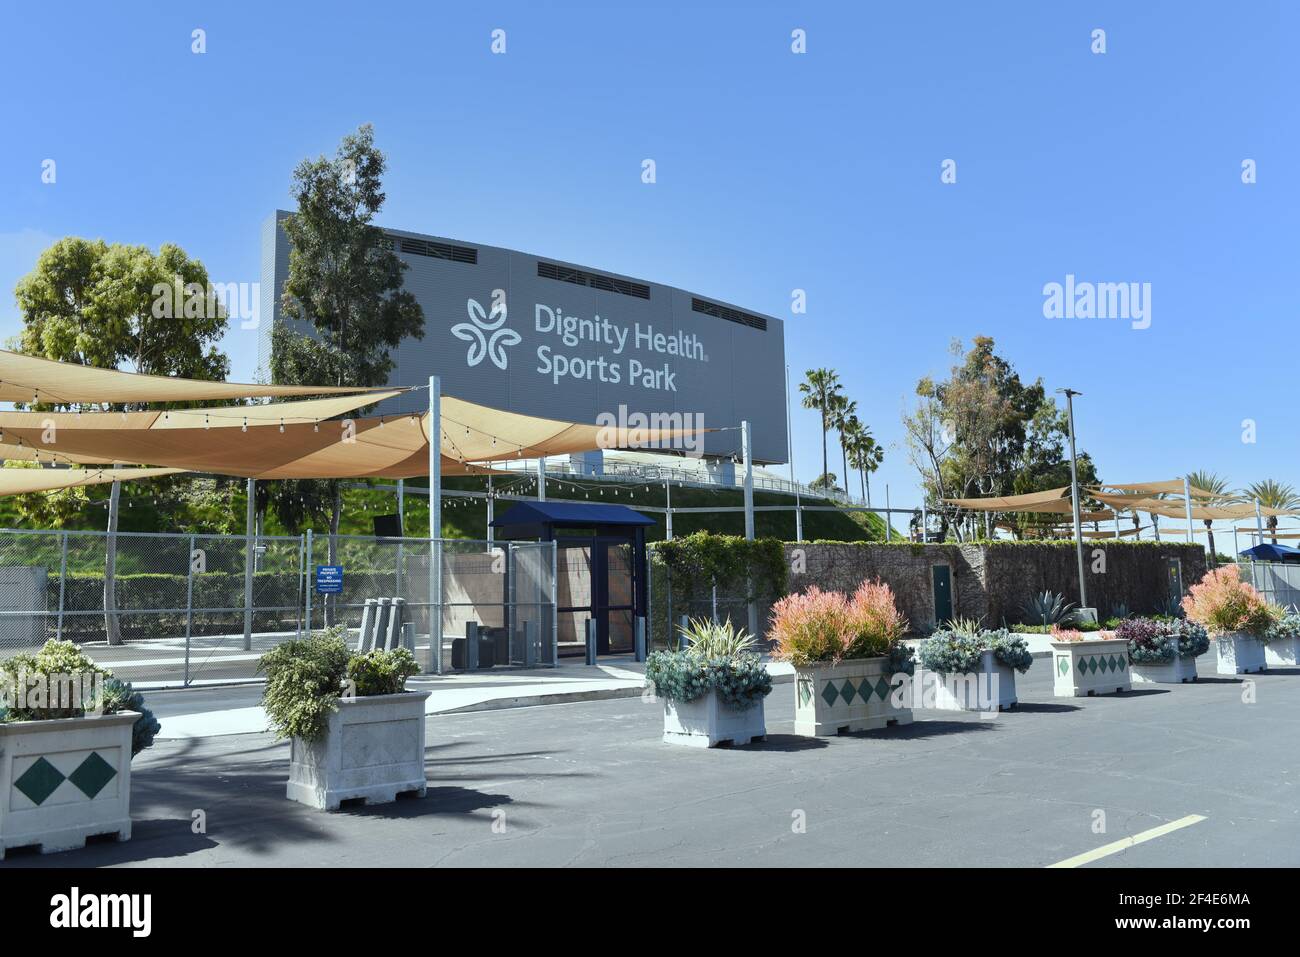 CARSON, CALIFORNIA - 20 MAR 2021: Sign at Dignity Health Sports Park, on the campus of Cal State Dominguez Hills, home to the LA Galaxy of Major Leagu Stock Photo